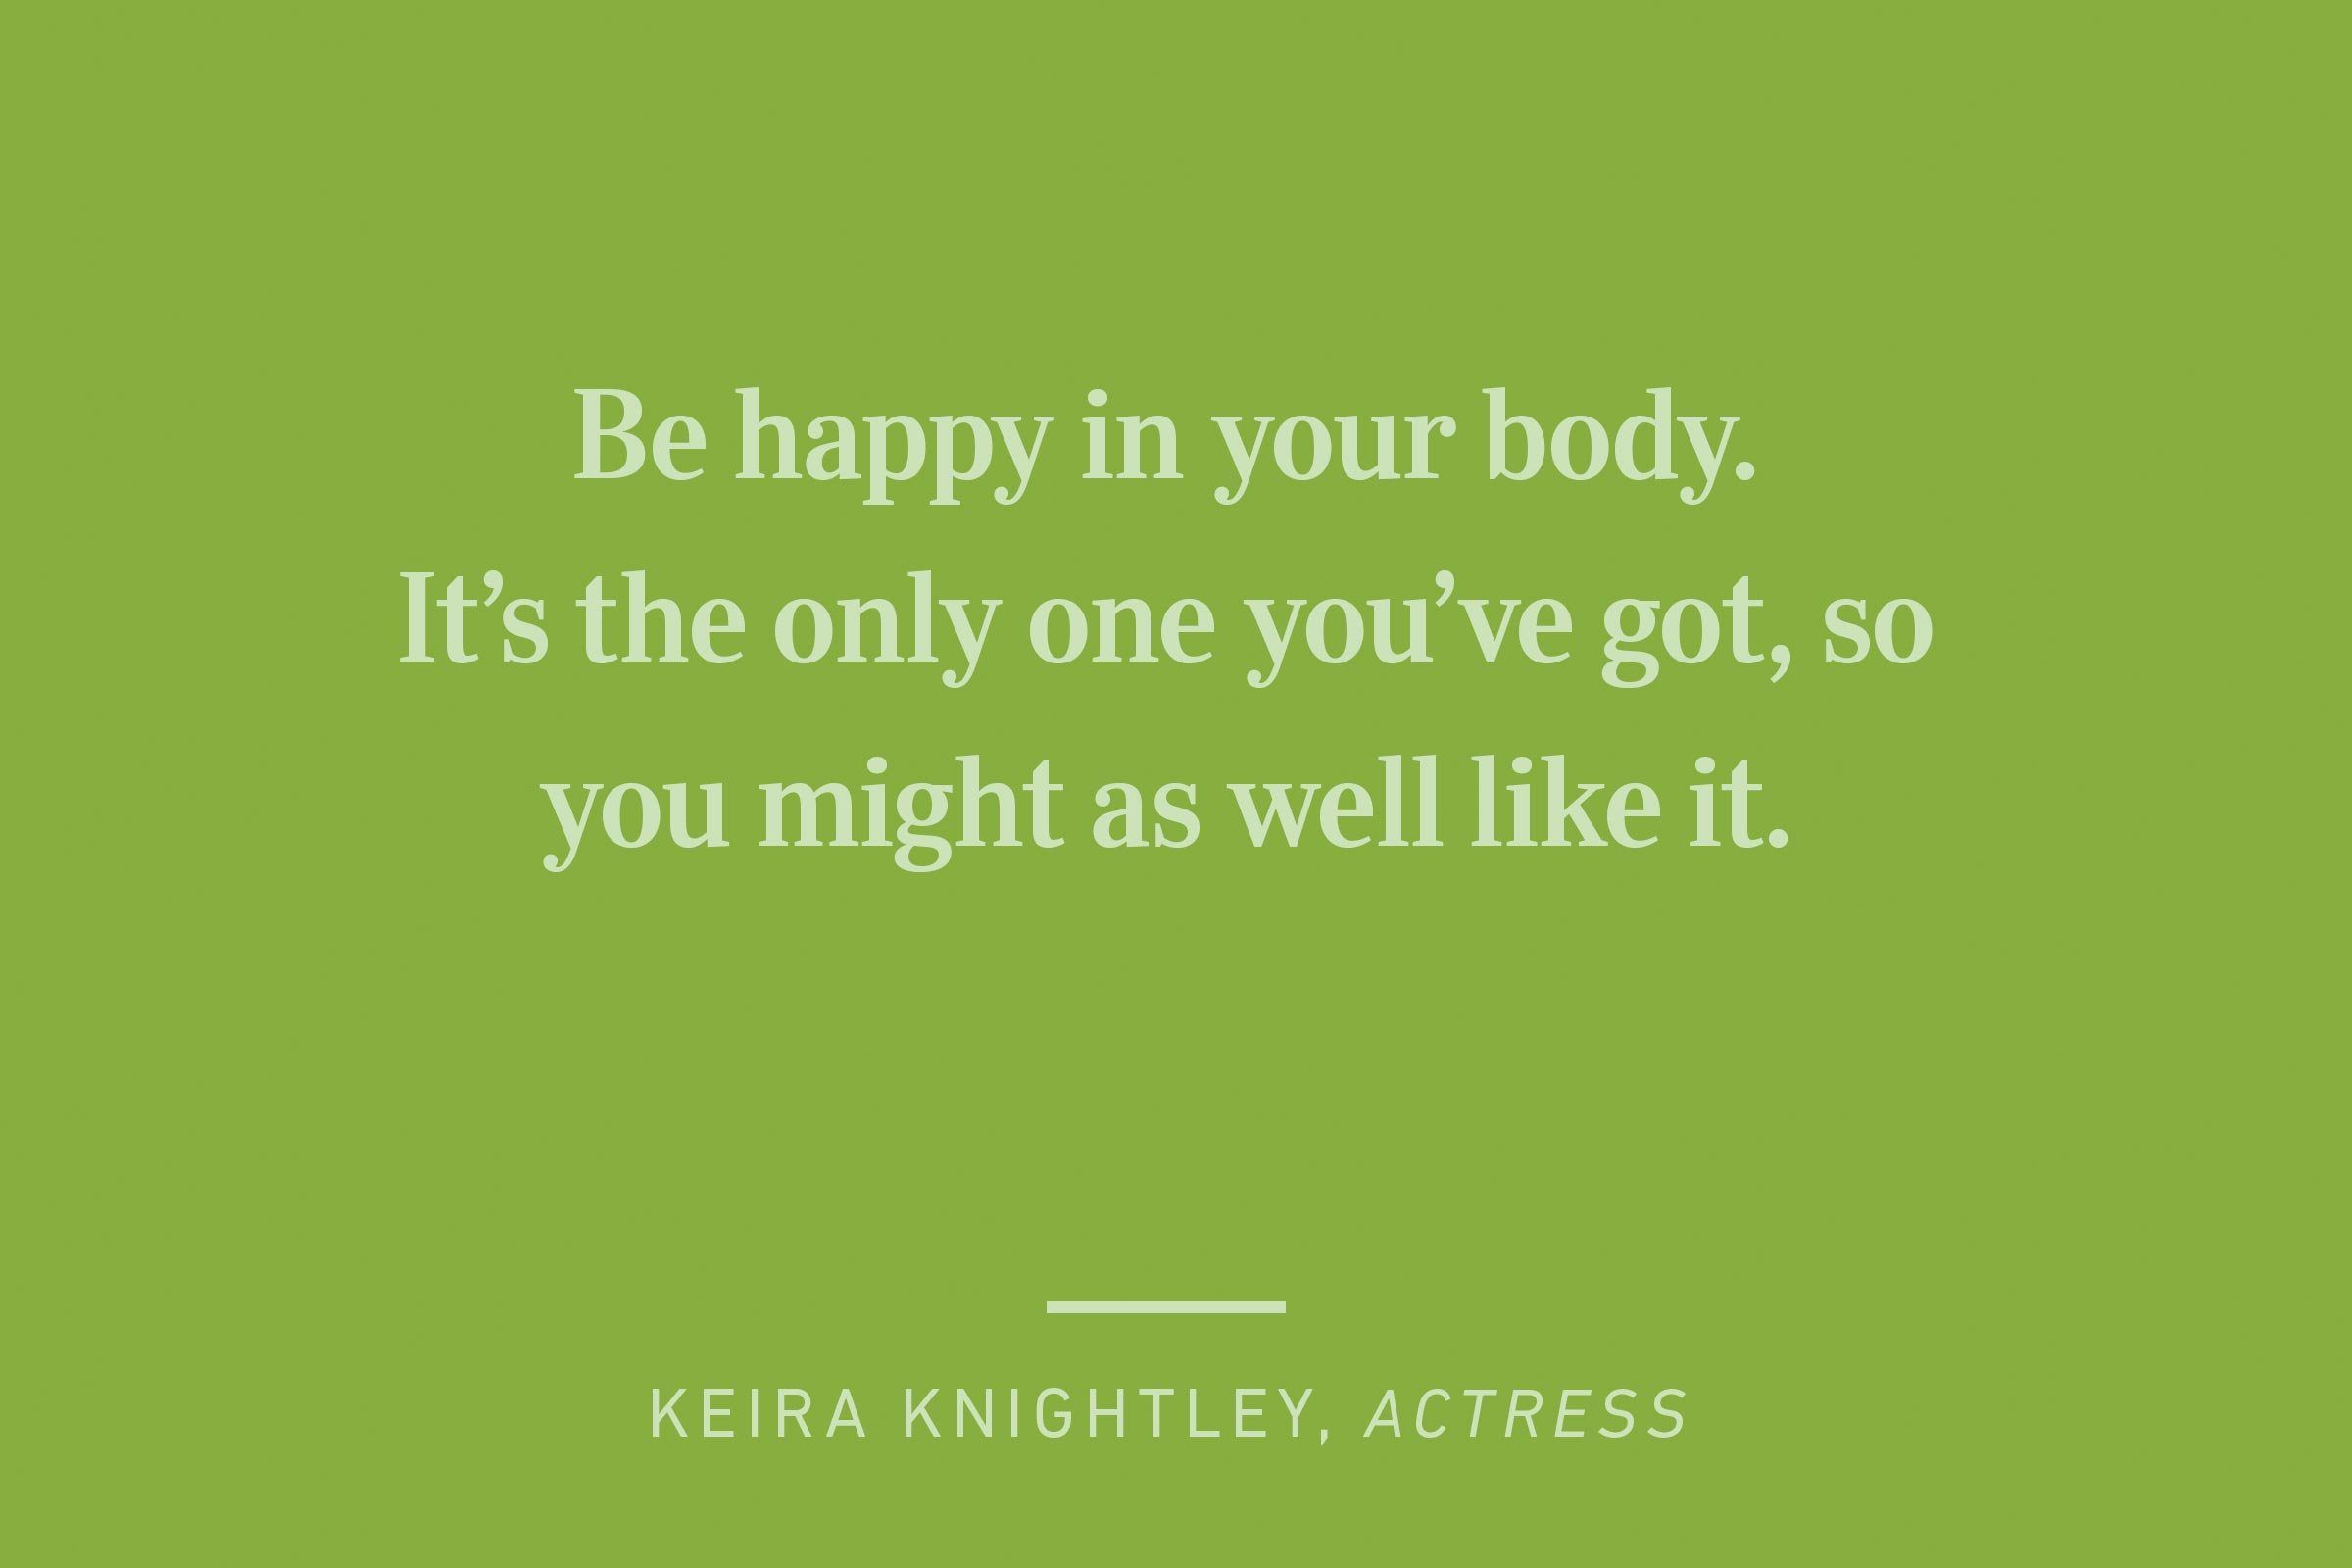 keira knightly happiness quote